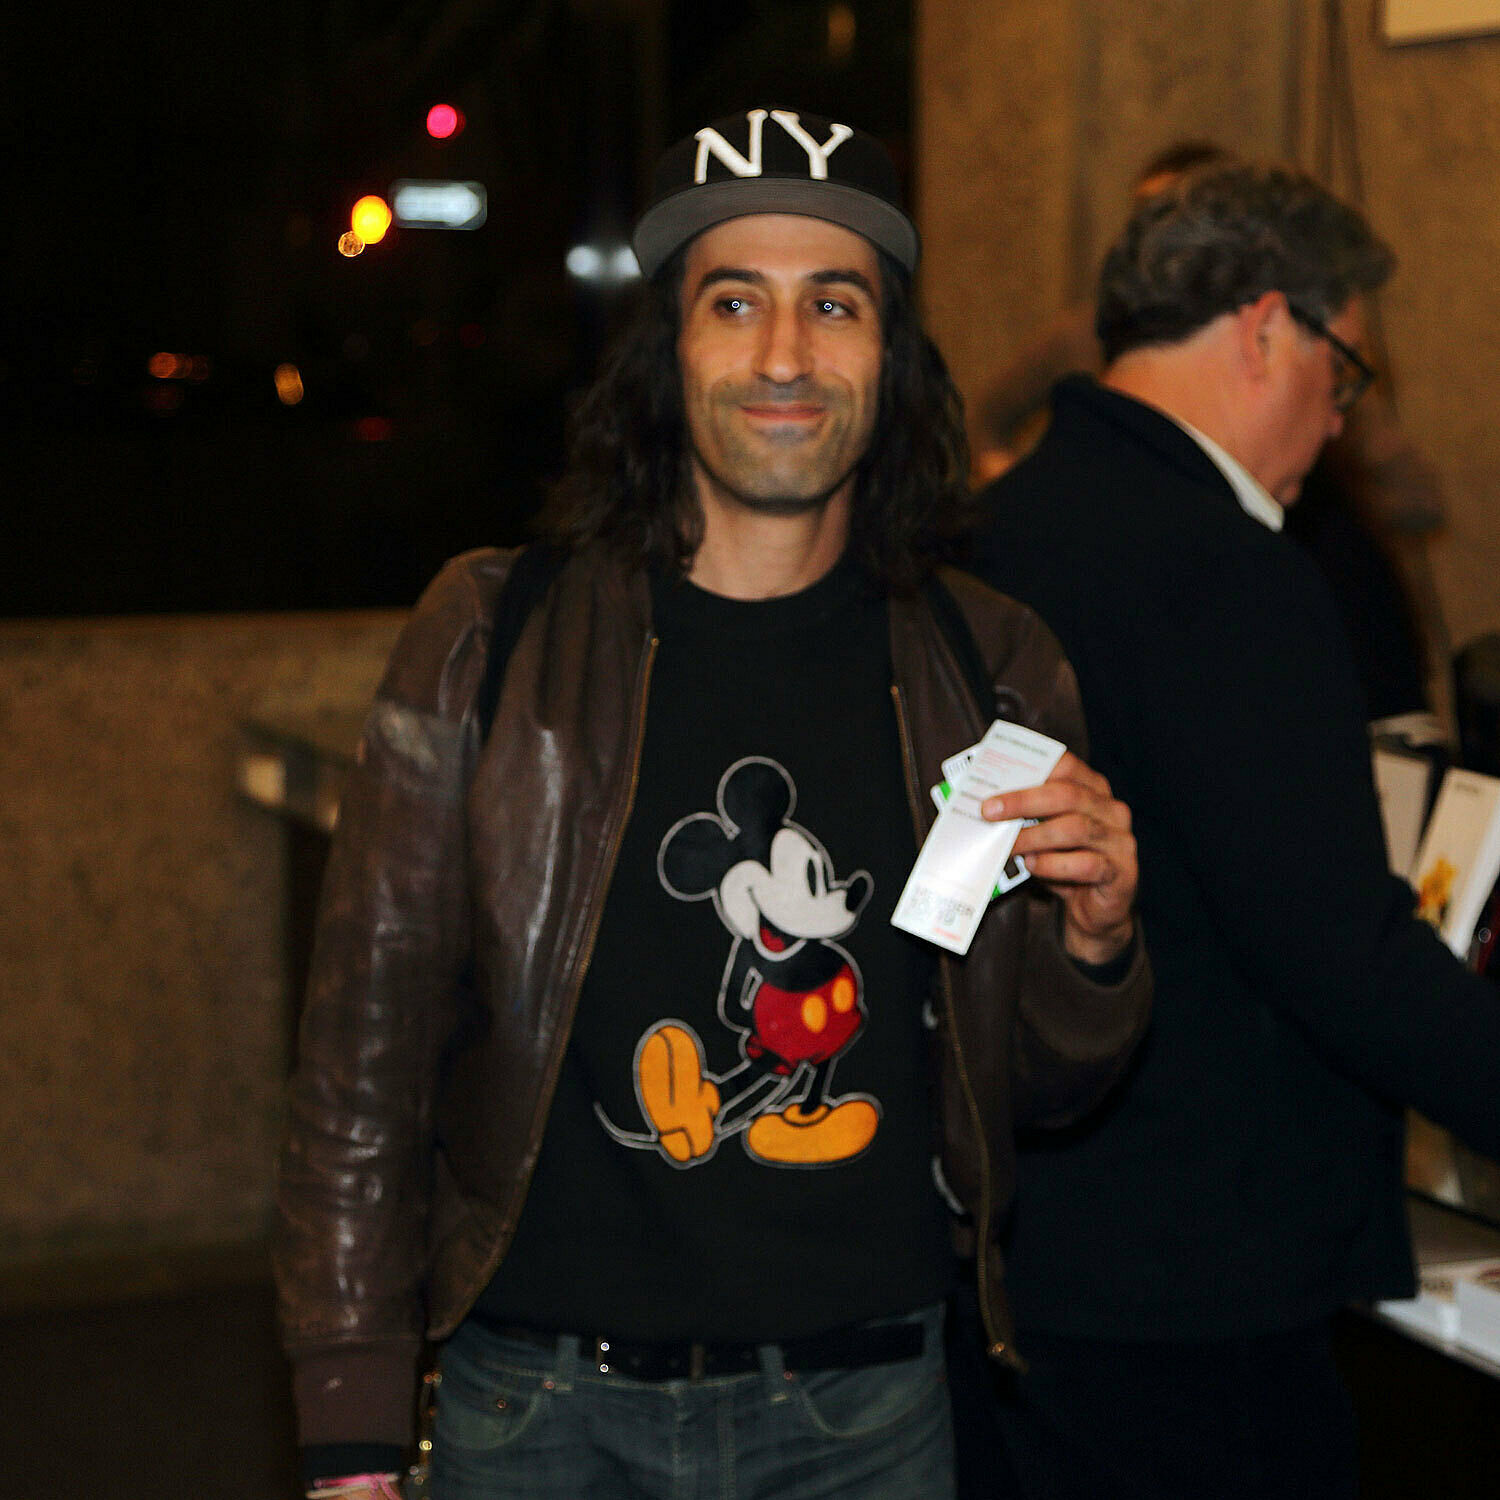 Man in a Mickey Mouse shirt with a ticket.